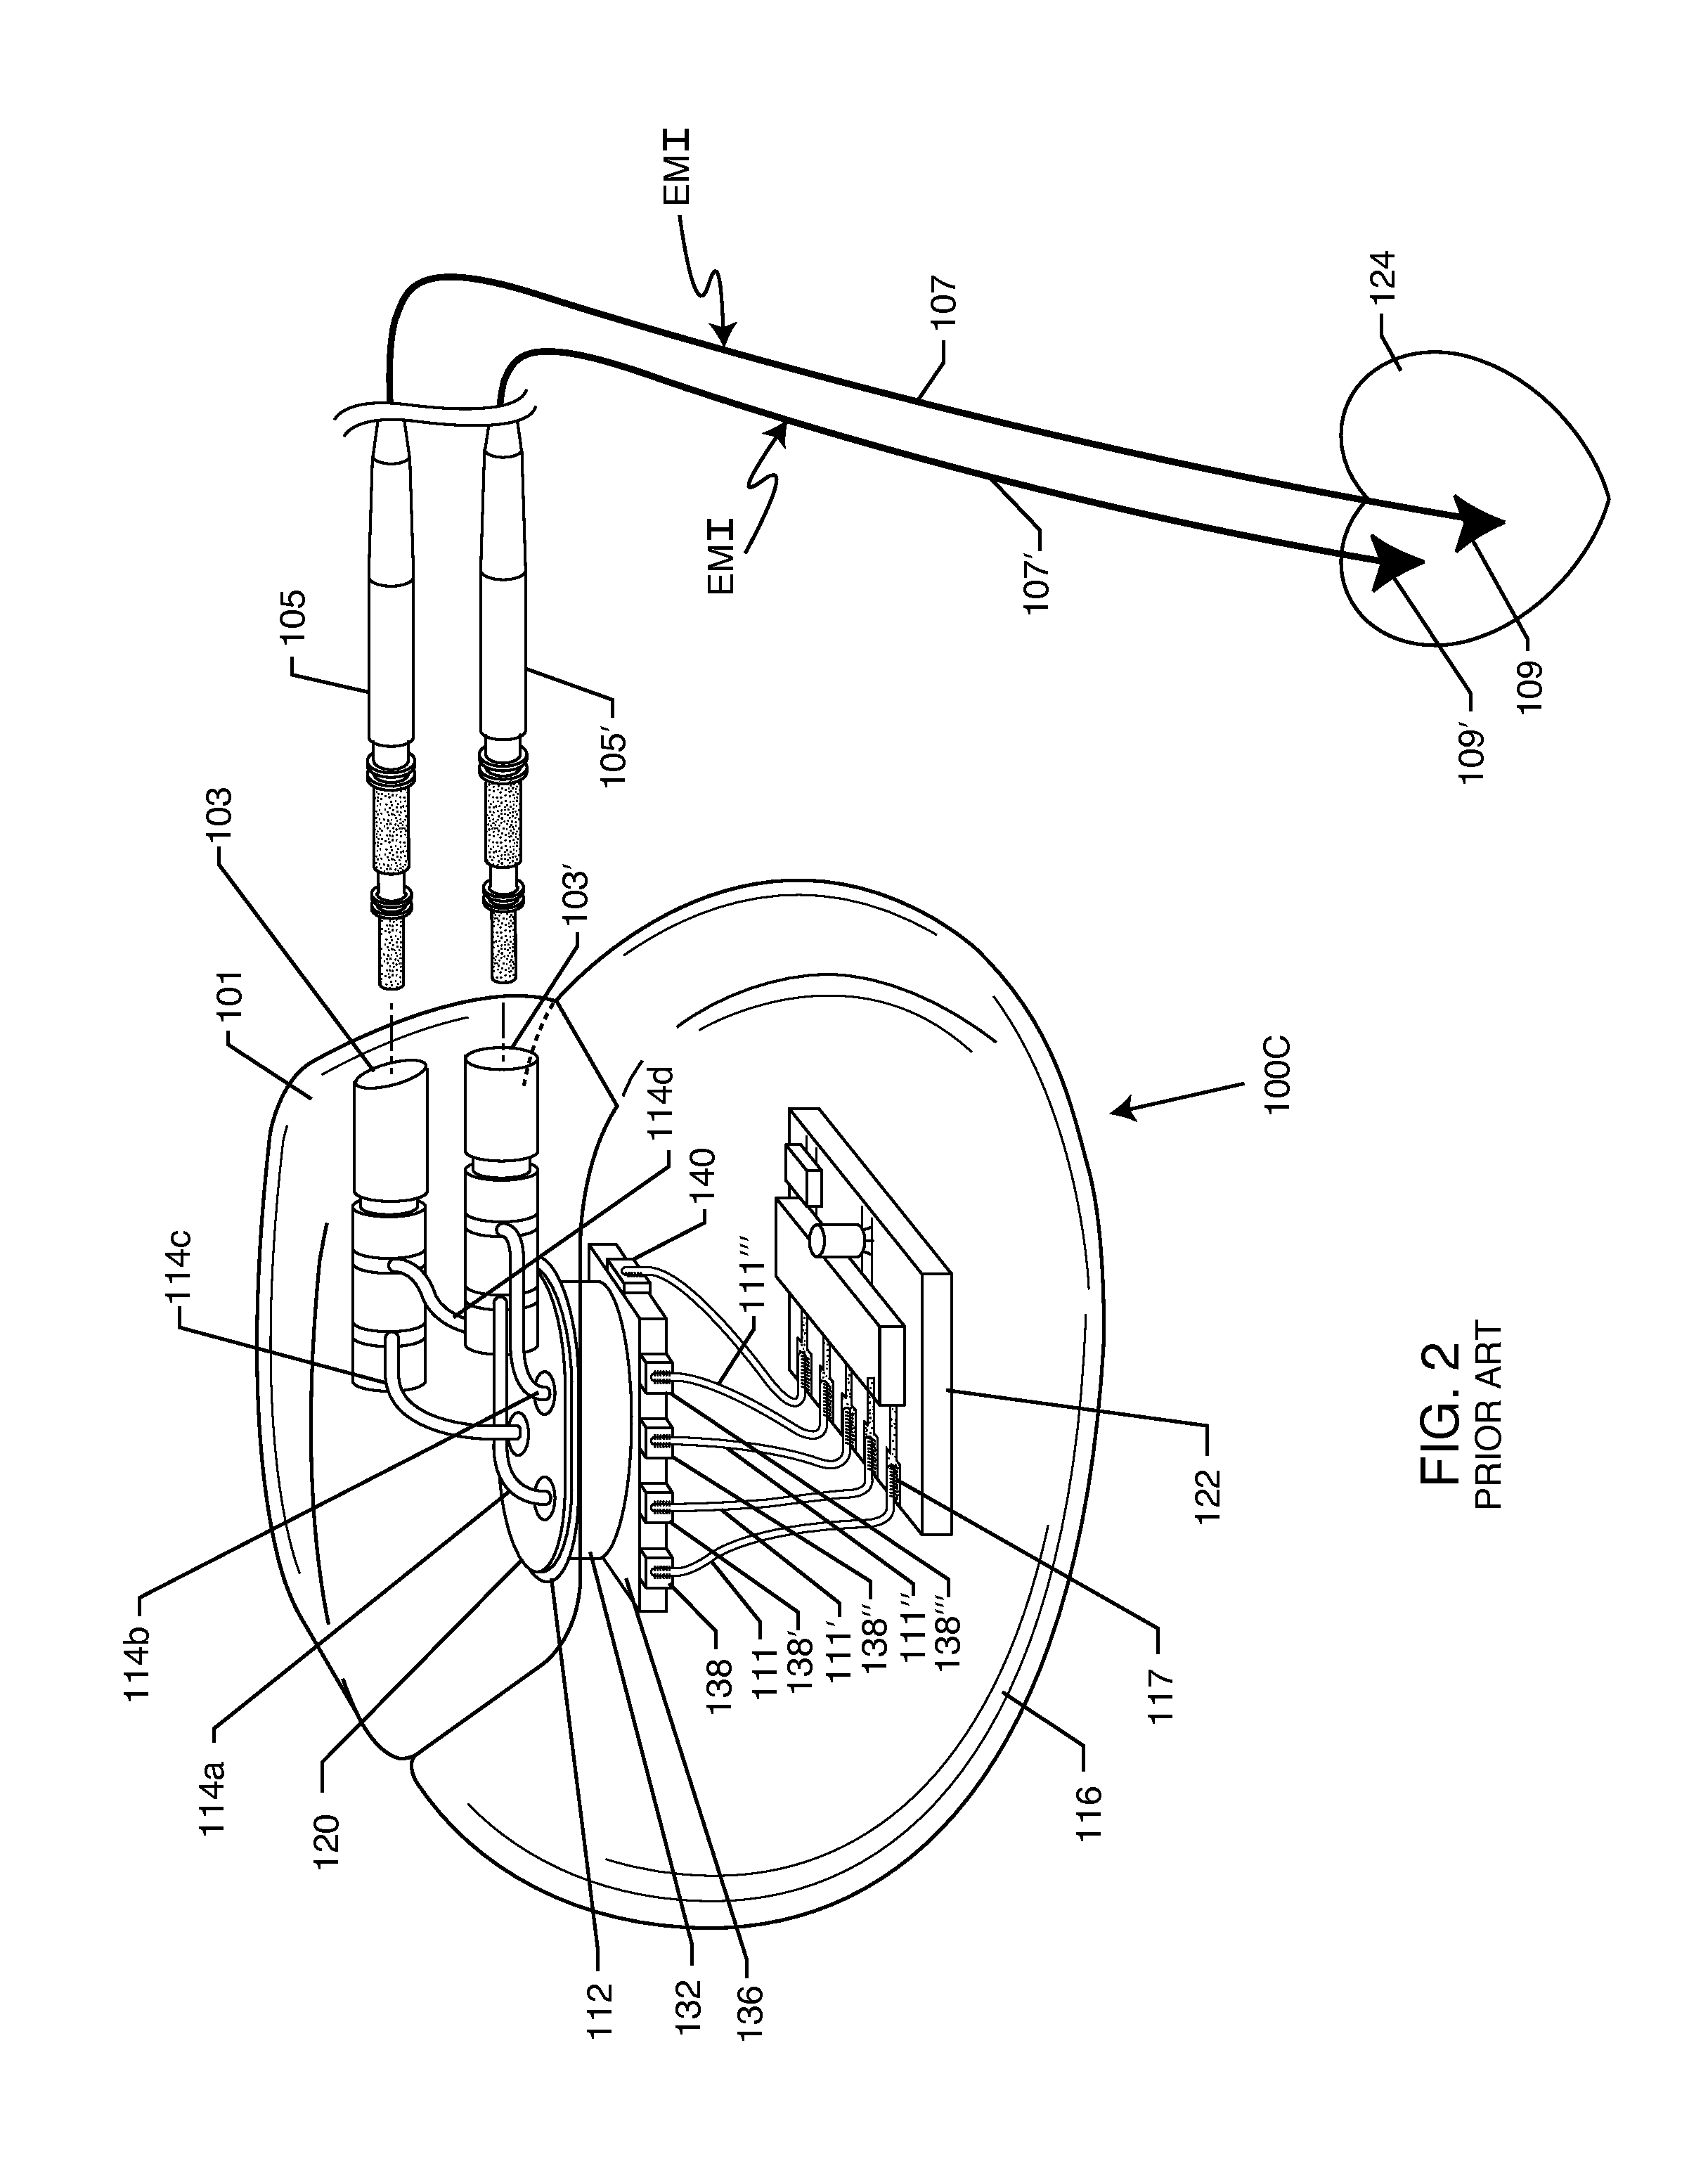 Low inductance and low resistance hermetically sealed filtered feedthrough for an aimd